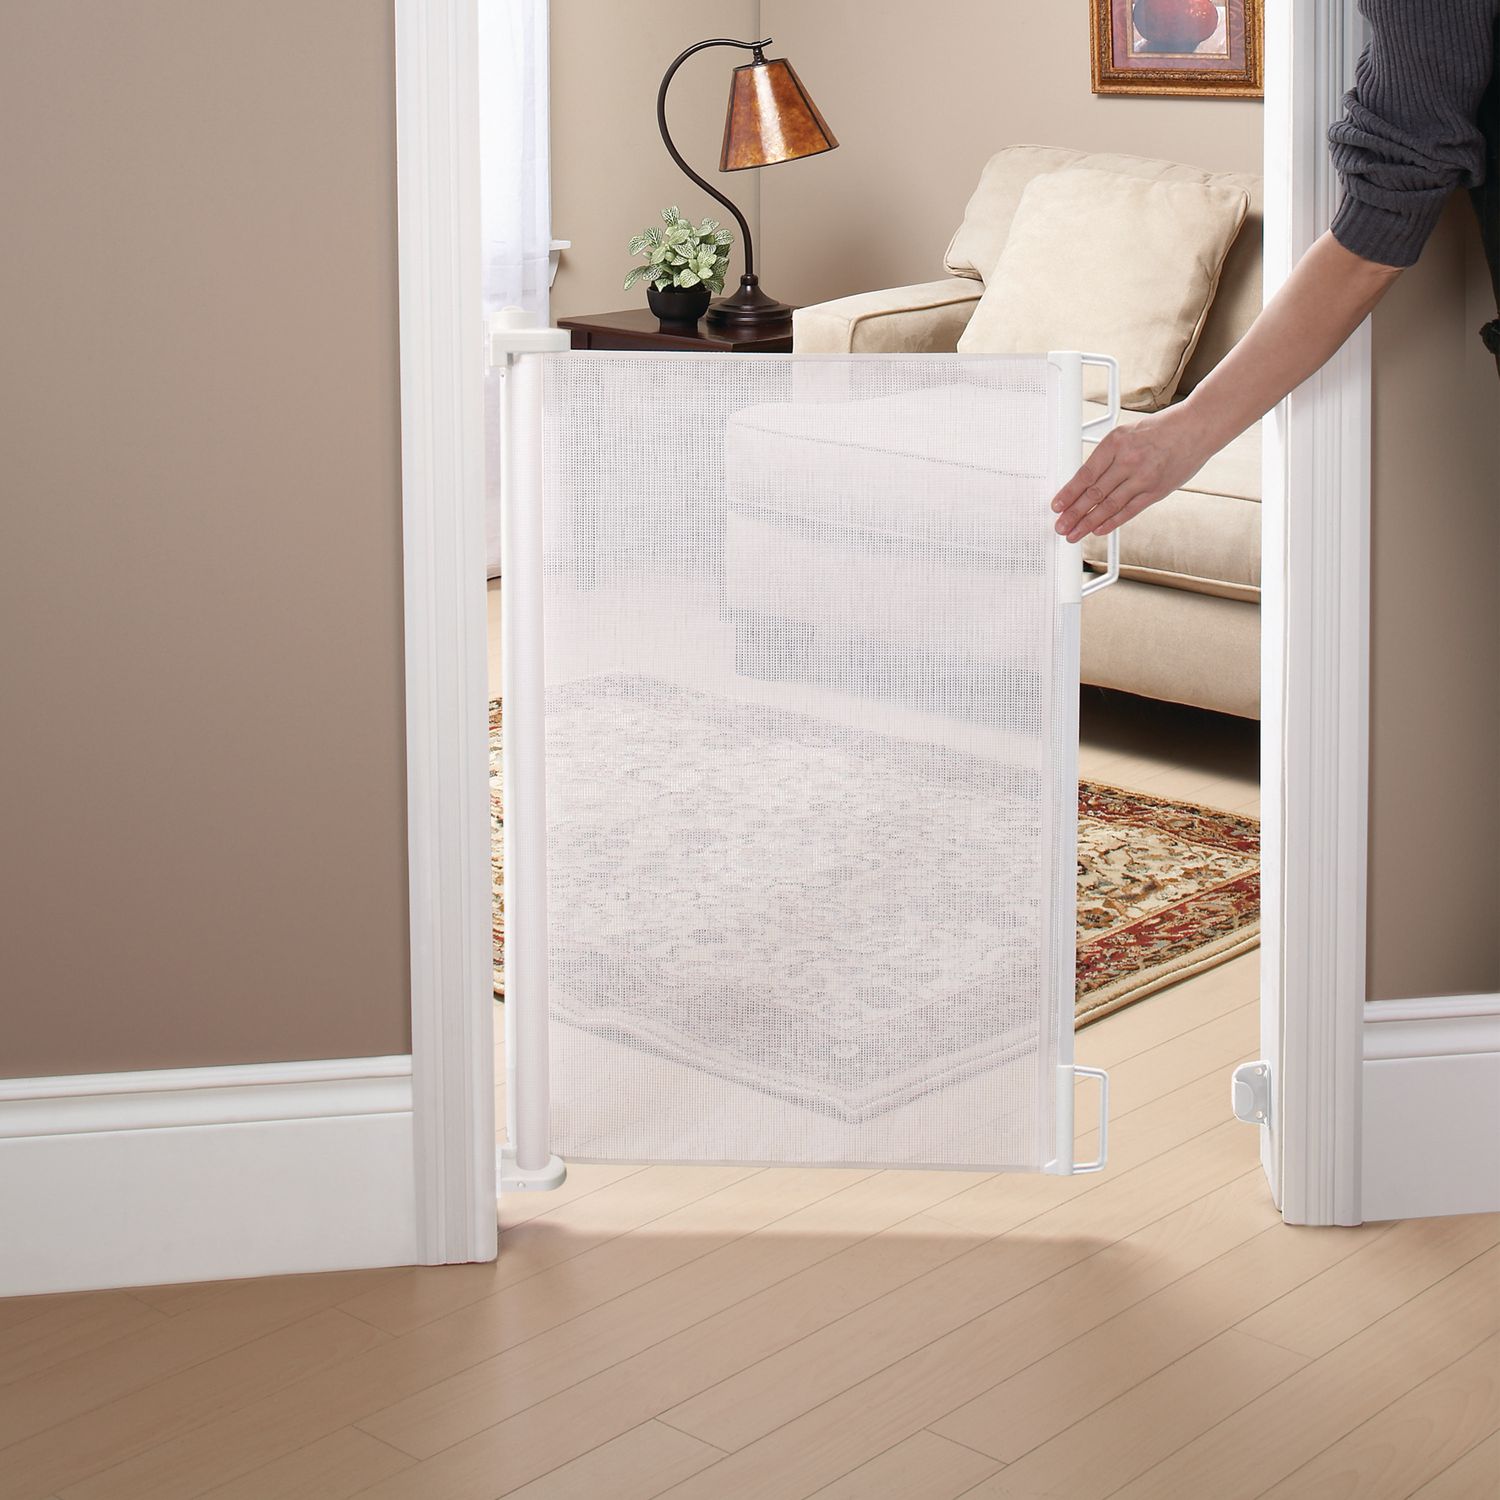 Retractable Baby Gate - Baby Gates for 